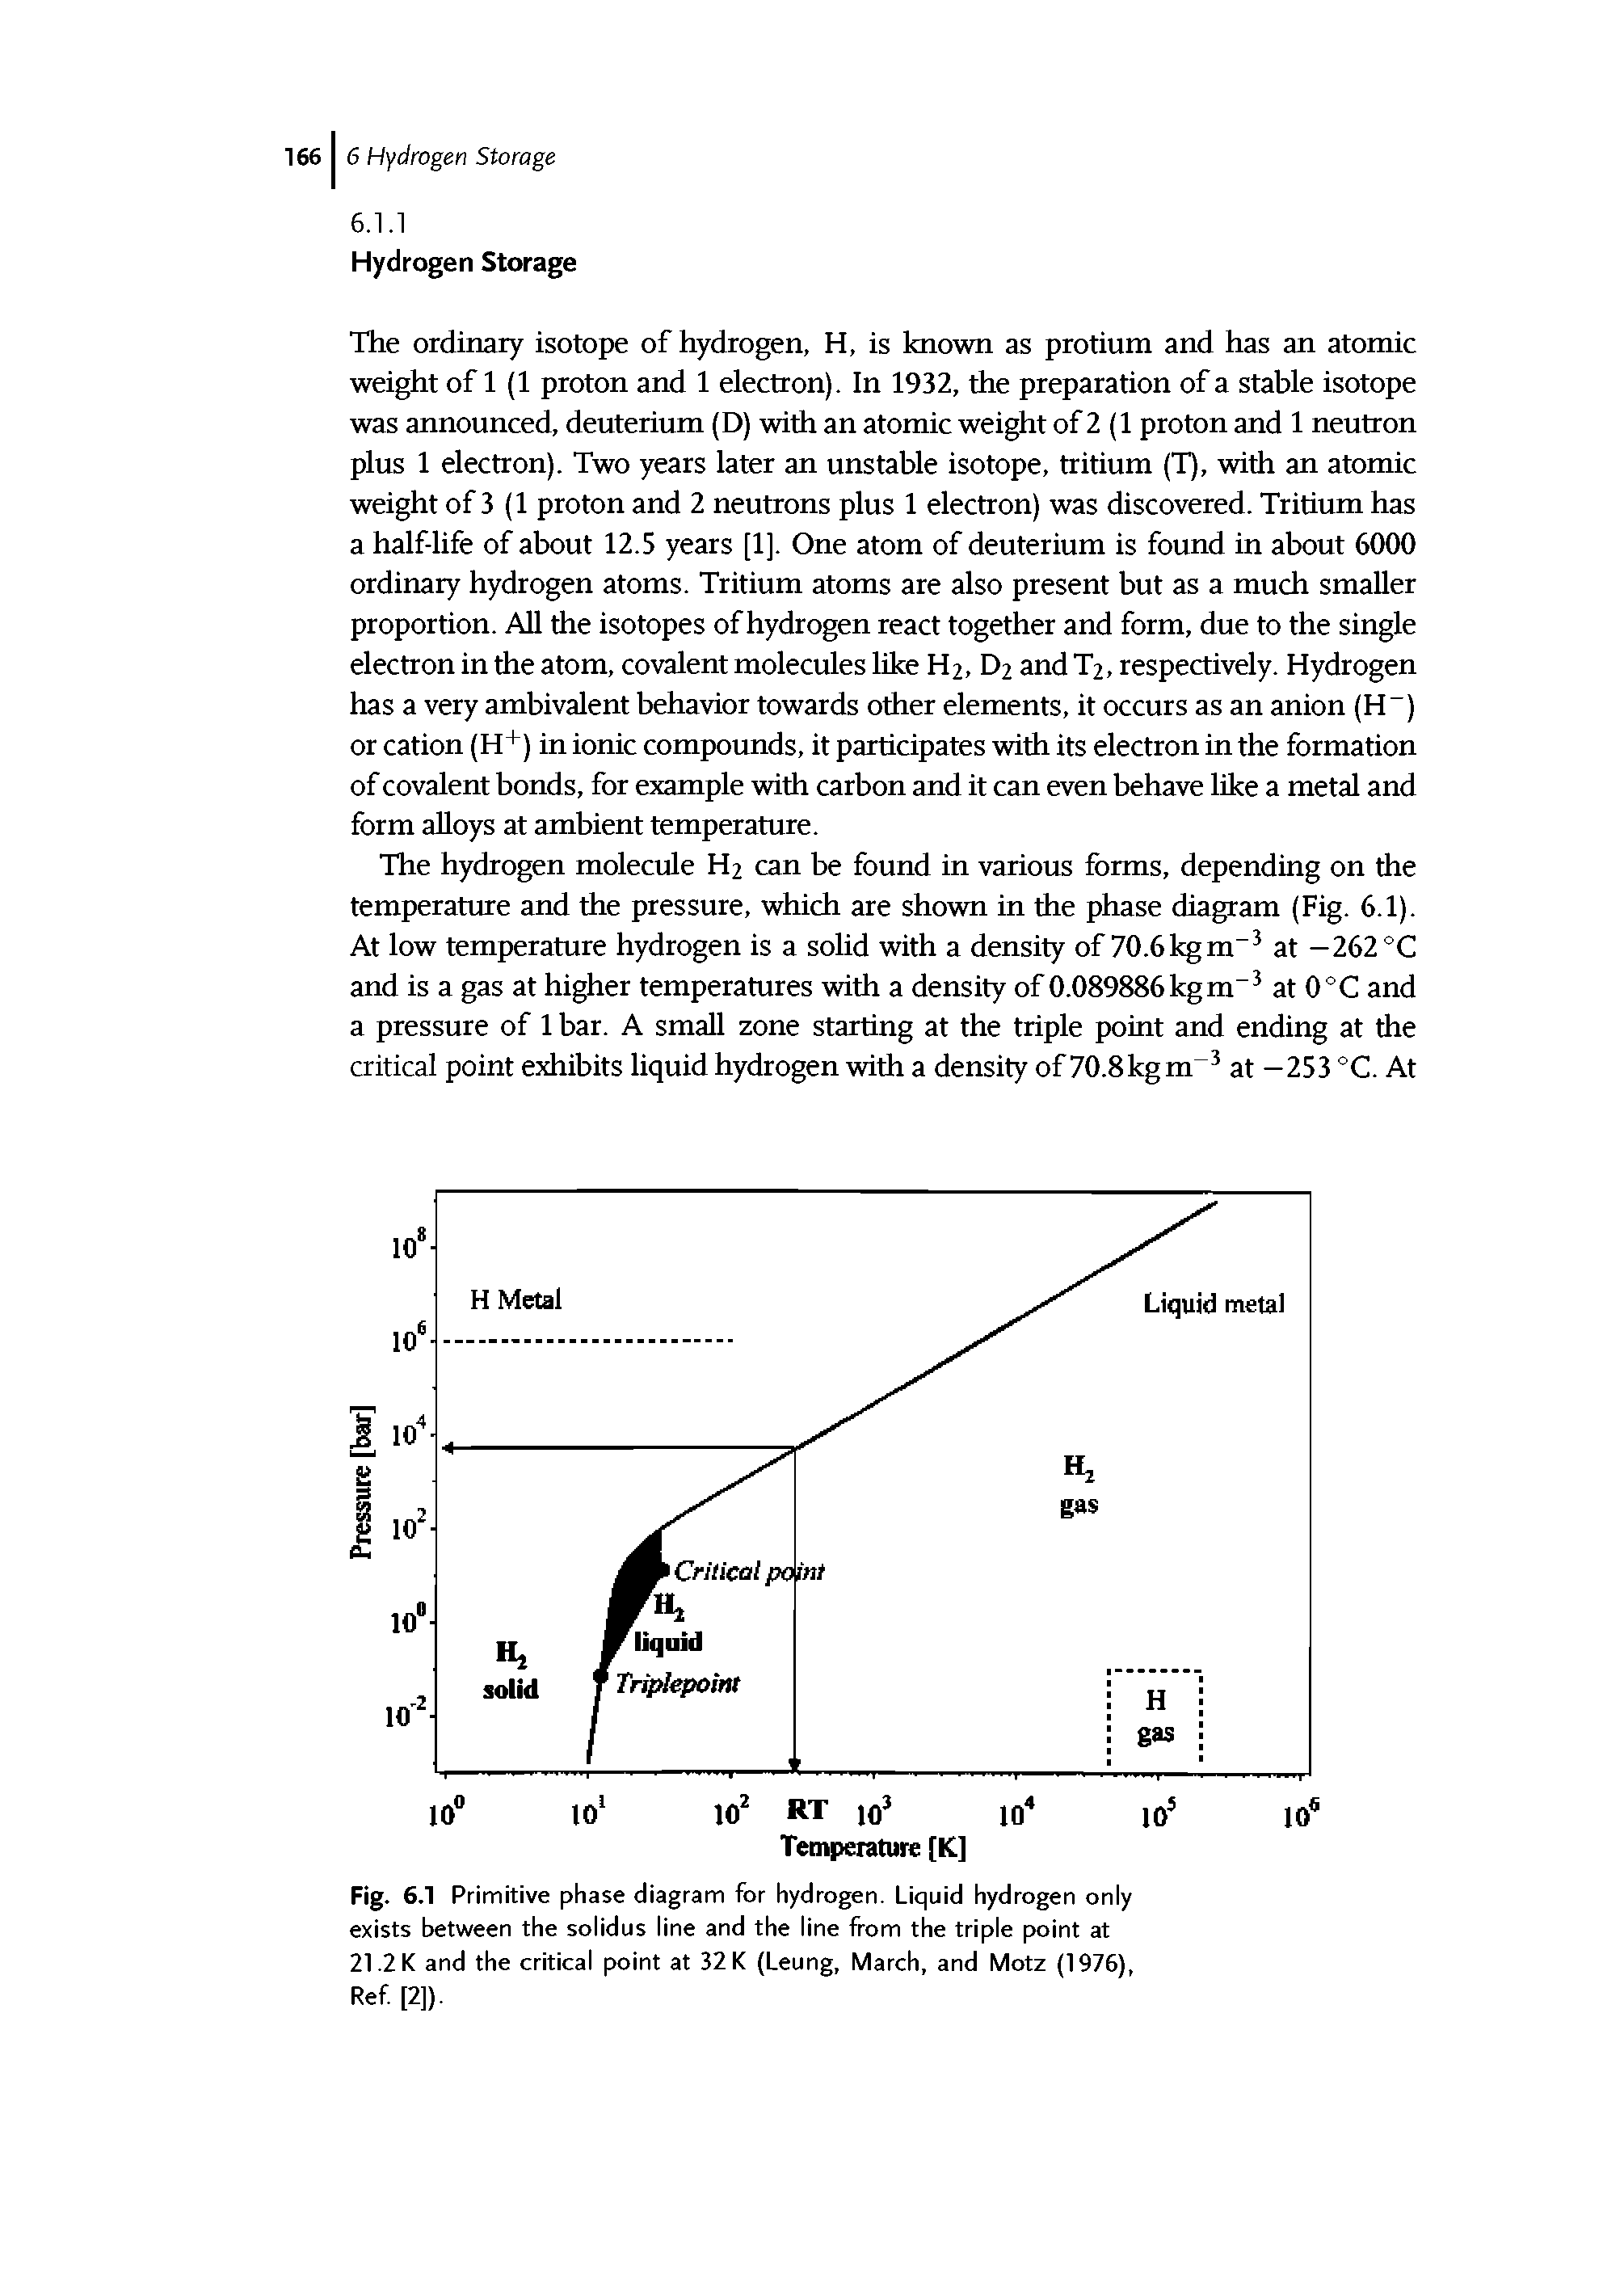 Fig. 6.1 Primitive phase diagram for hydrogen. Liquid hydrogen only exists between the solidus line and the line from the triple point at 21.2 K and the critical point at 32 K (Leung, March, and Motz (1975), Ref [2]).